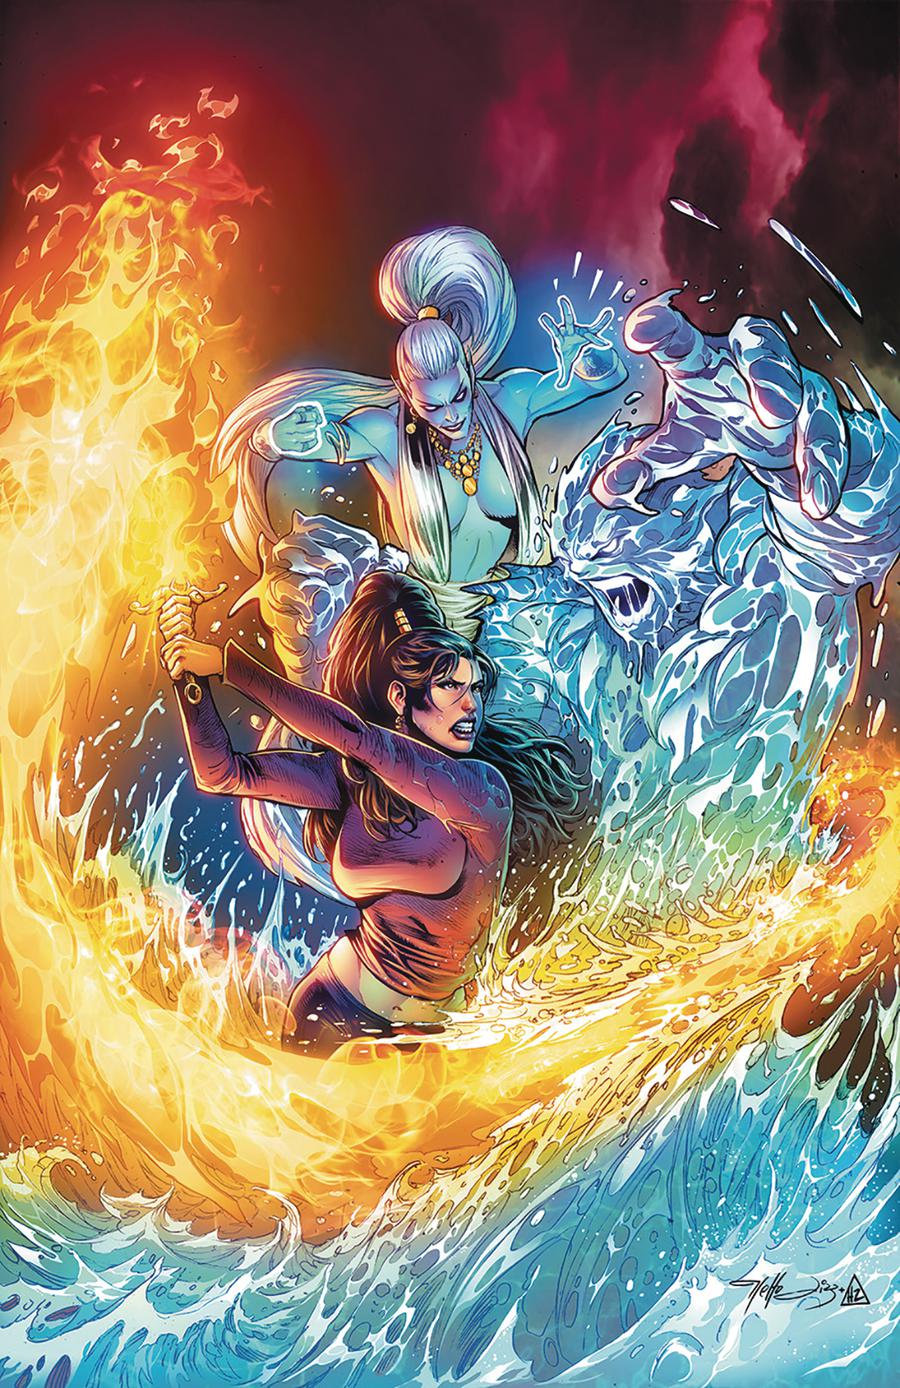 Grimm Fairy Tales Presents Dance Of The Dead #5 Cover B Netho Diaz